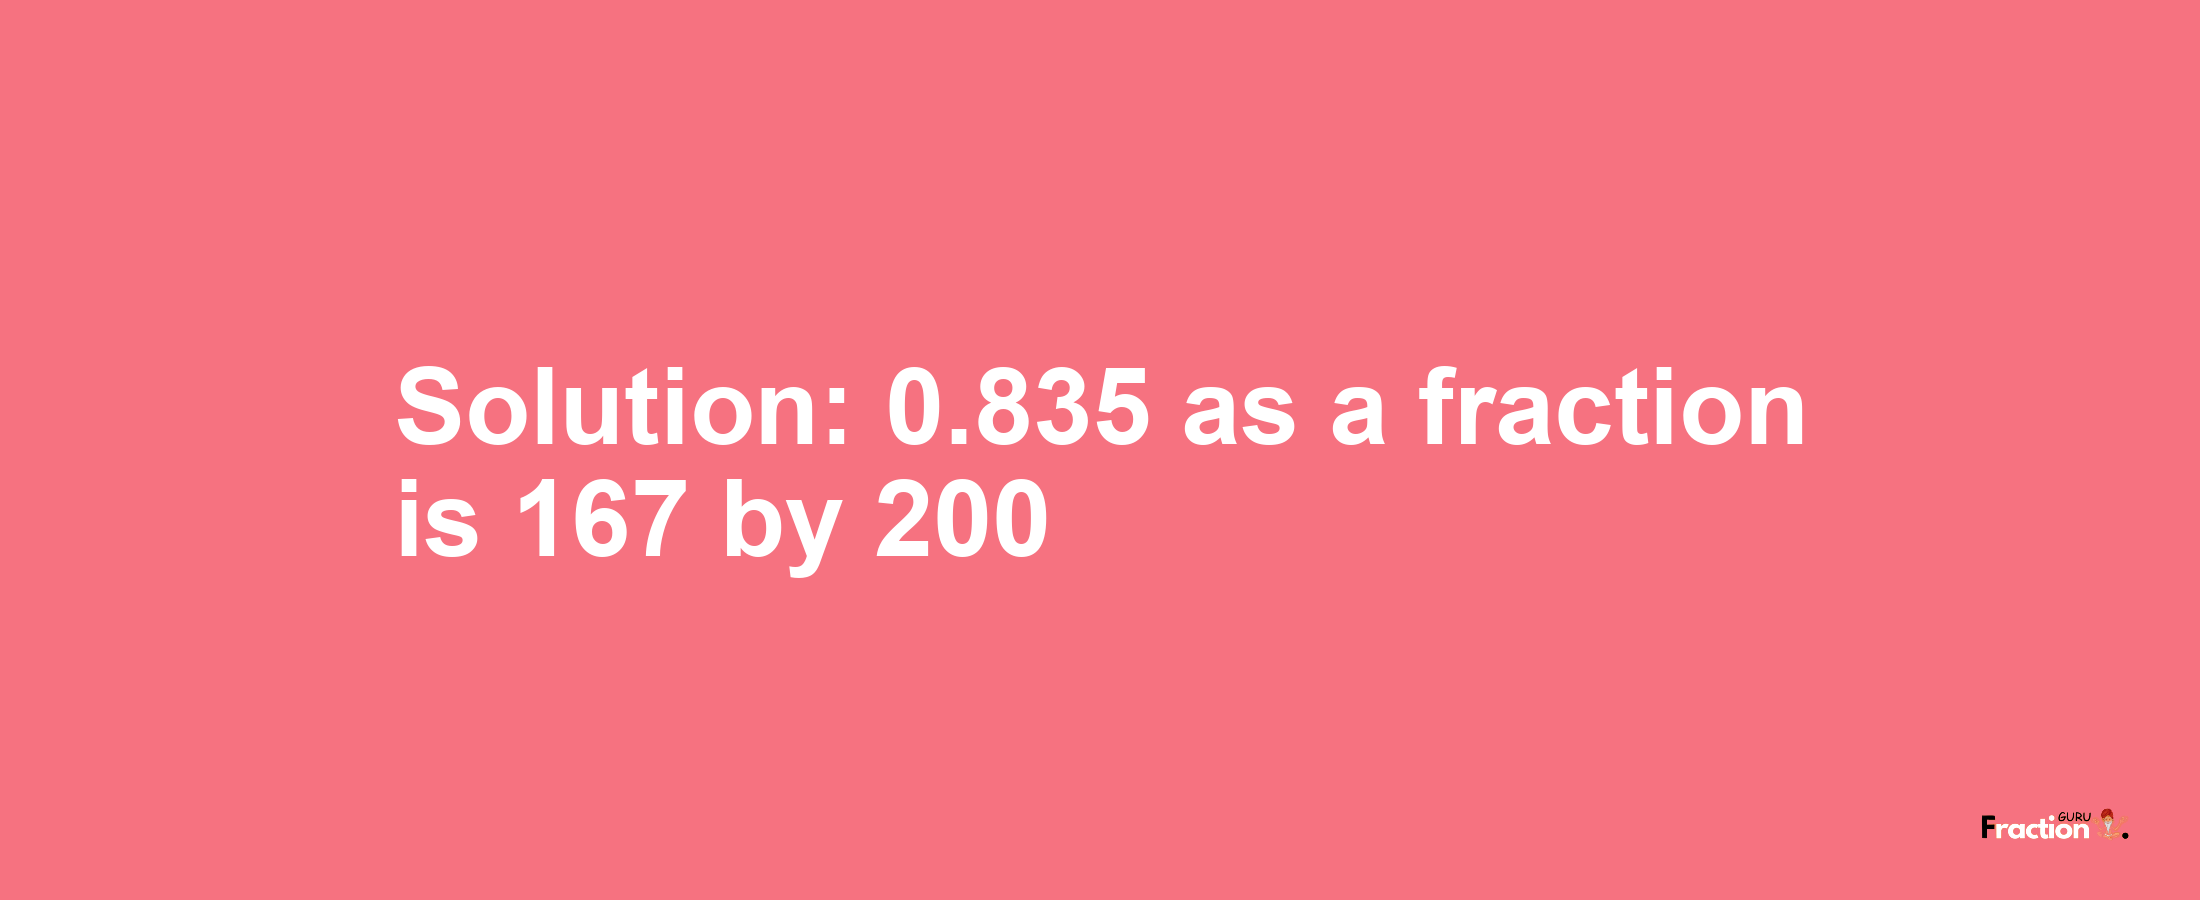 Solution:0.835 as a fraction is 167/200